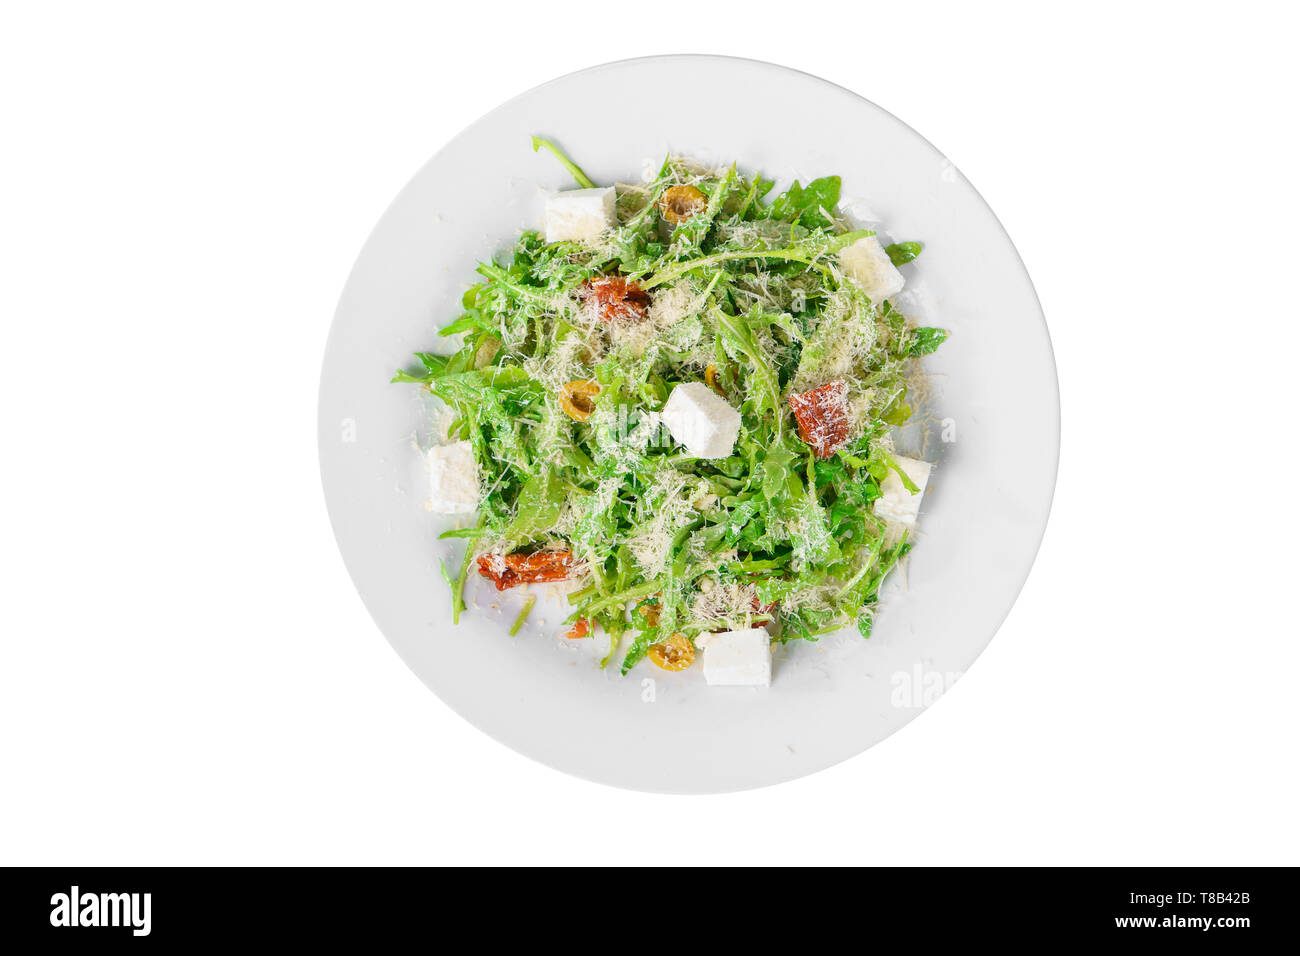 Salad with with arugula, feta, dried tomatoes, olives and grated cheese on plate, white isolated background, view from above Stock Photo